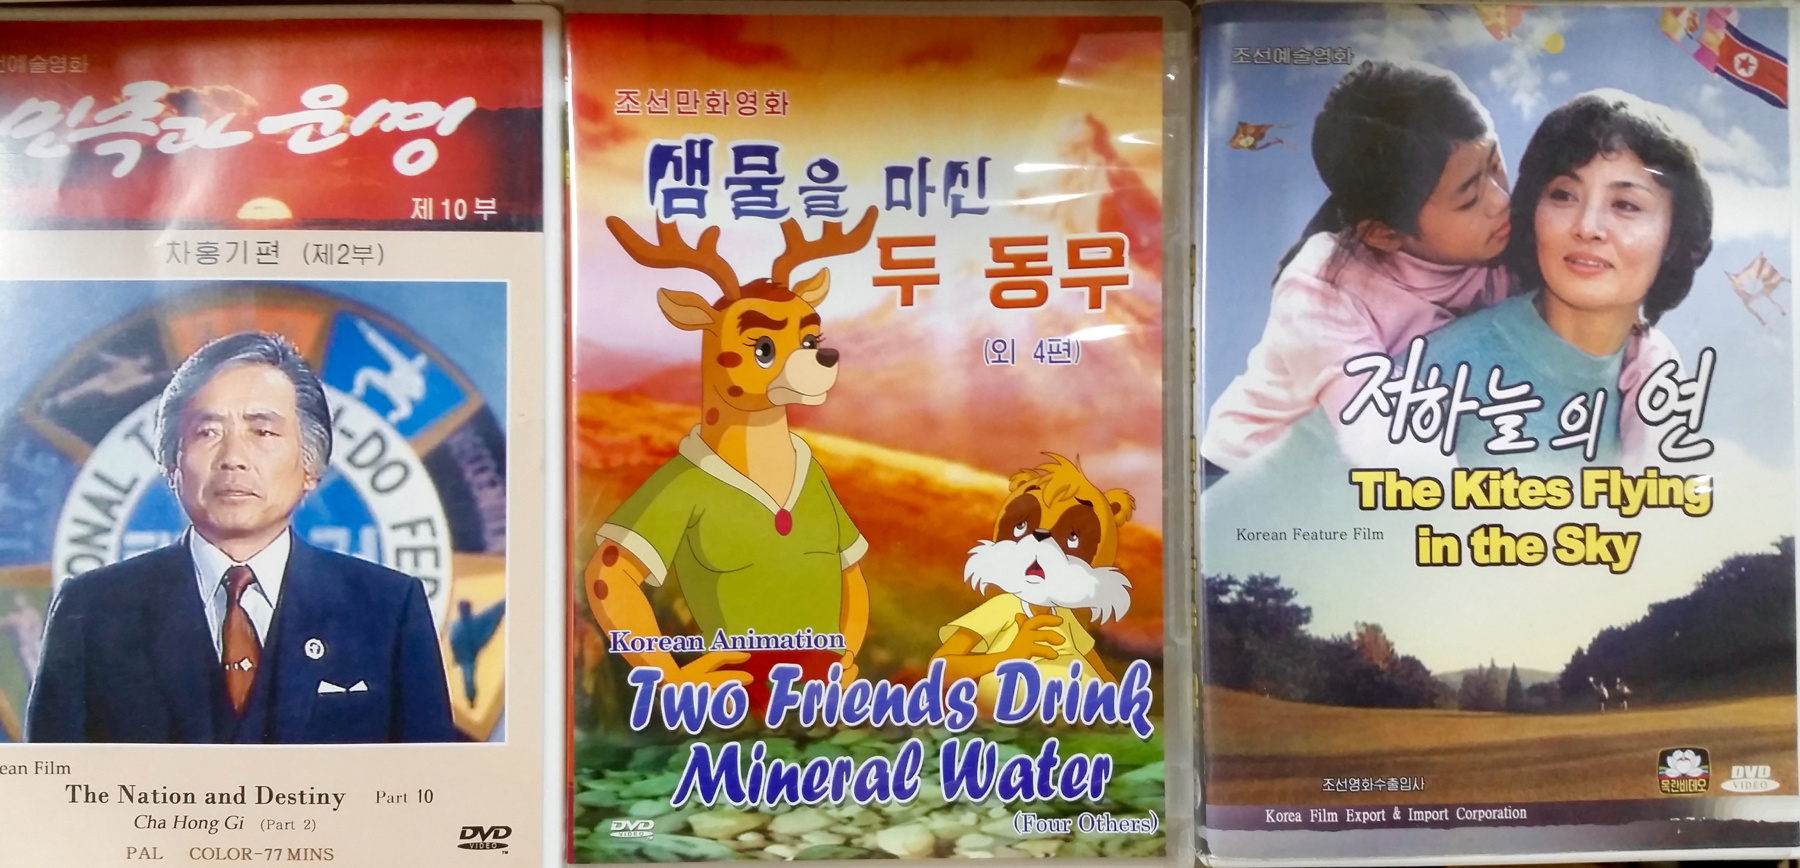 Clean water is a genuine problem in many parts of North Korea, which is what I suspect prompted the creation of this kids' film.